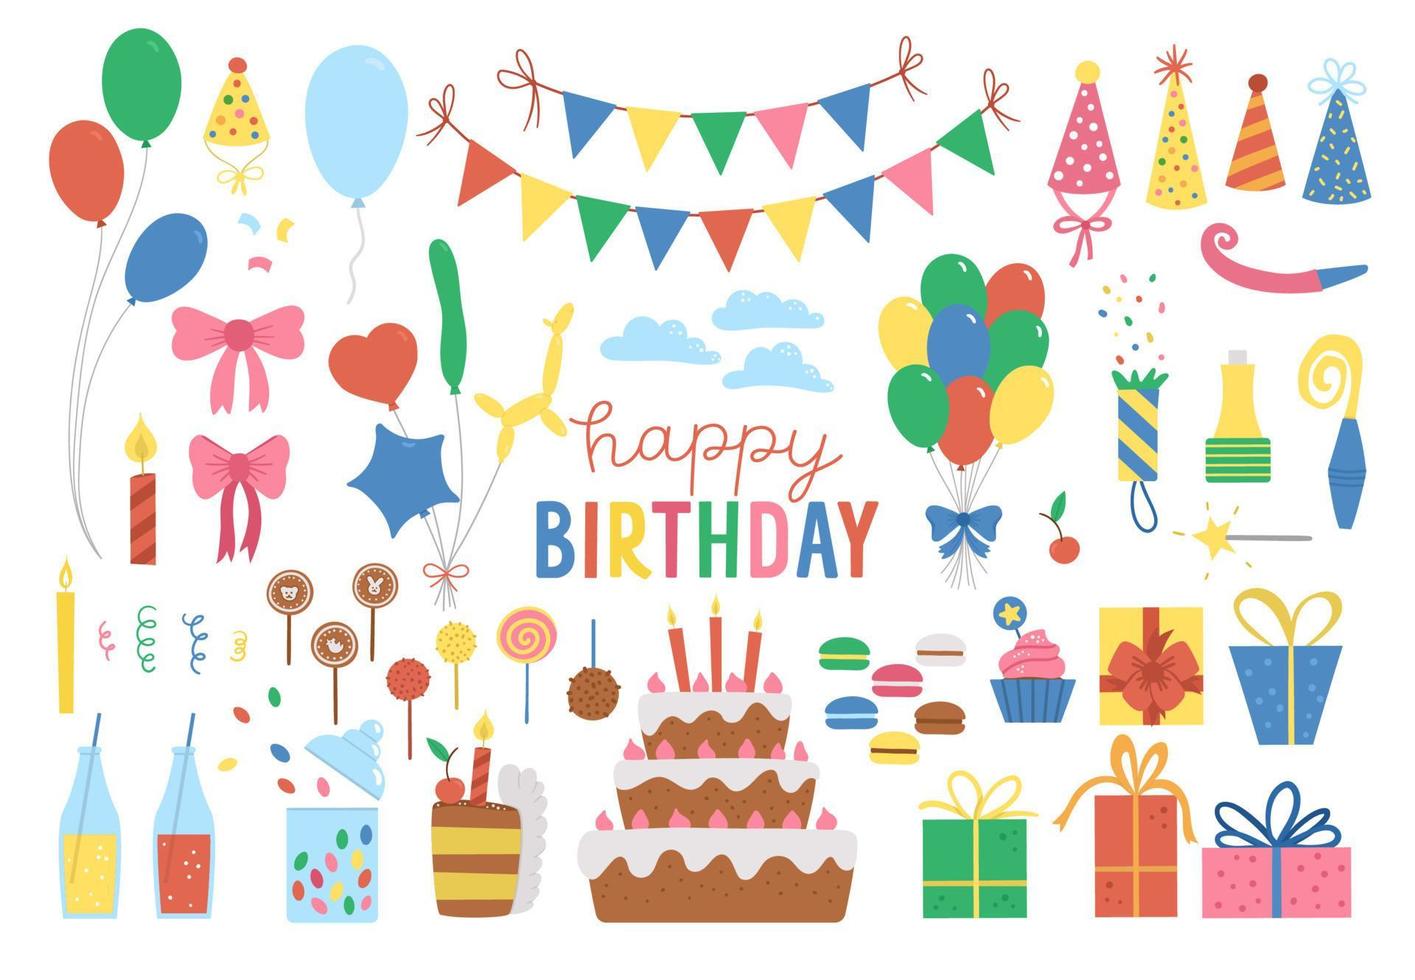 Set of cute Birthday design elements. Party celebration clipart collection. Vector holiday pack with bright presents, cake with candles, balloons, flags. Happy anniversary icons